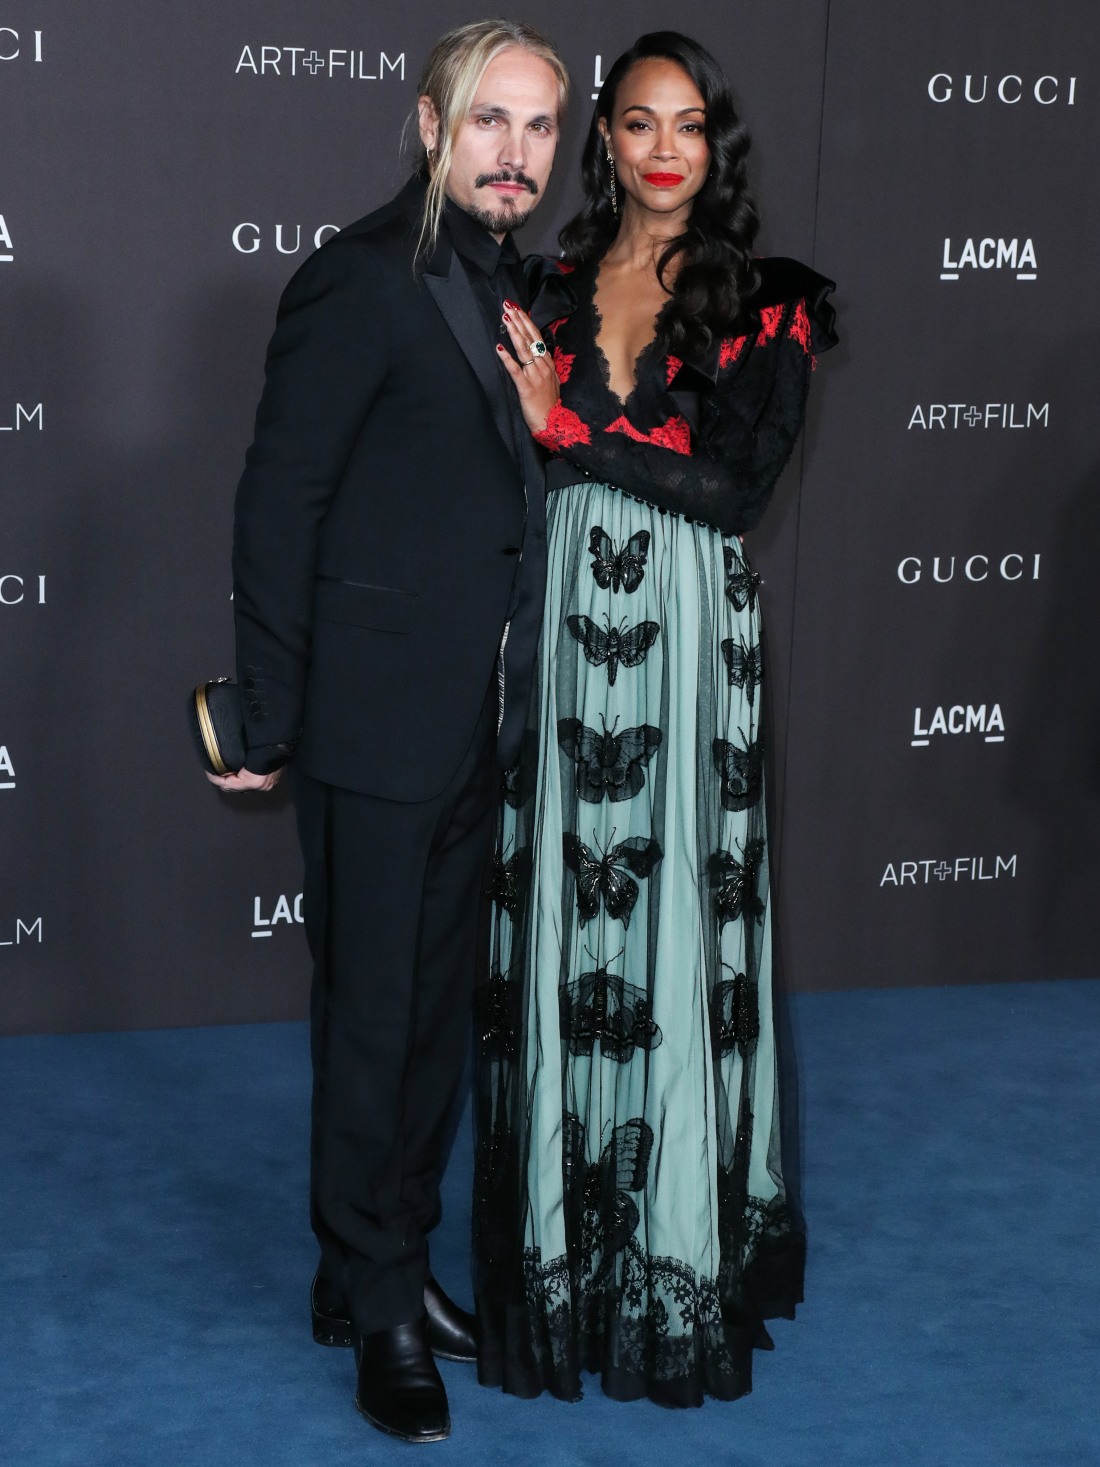 Marco Perego and Zoe Saldana arrive at the 2019 LACMA Art + Film Gala held at the Los Angeles County Museum of Art on November 2, 2019 in Los Angeles, California, United States.